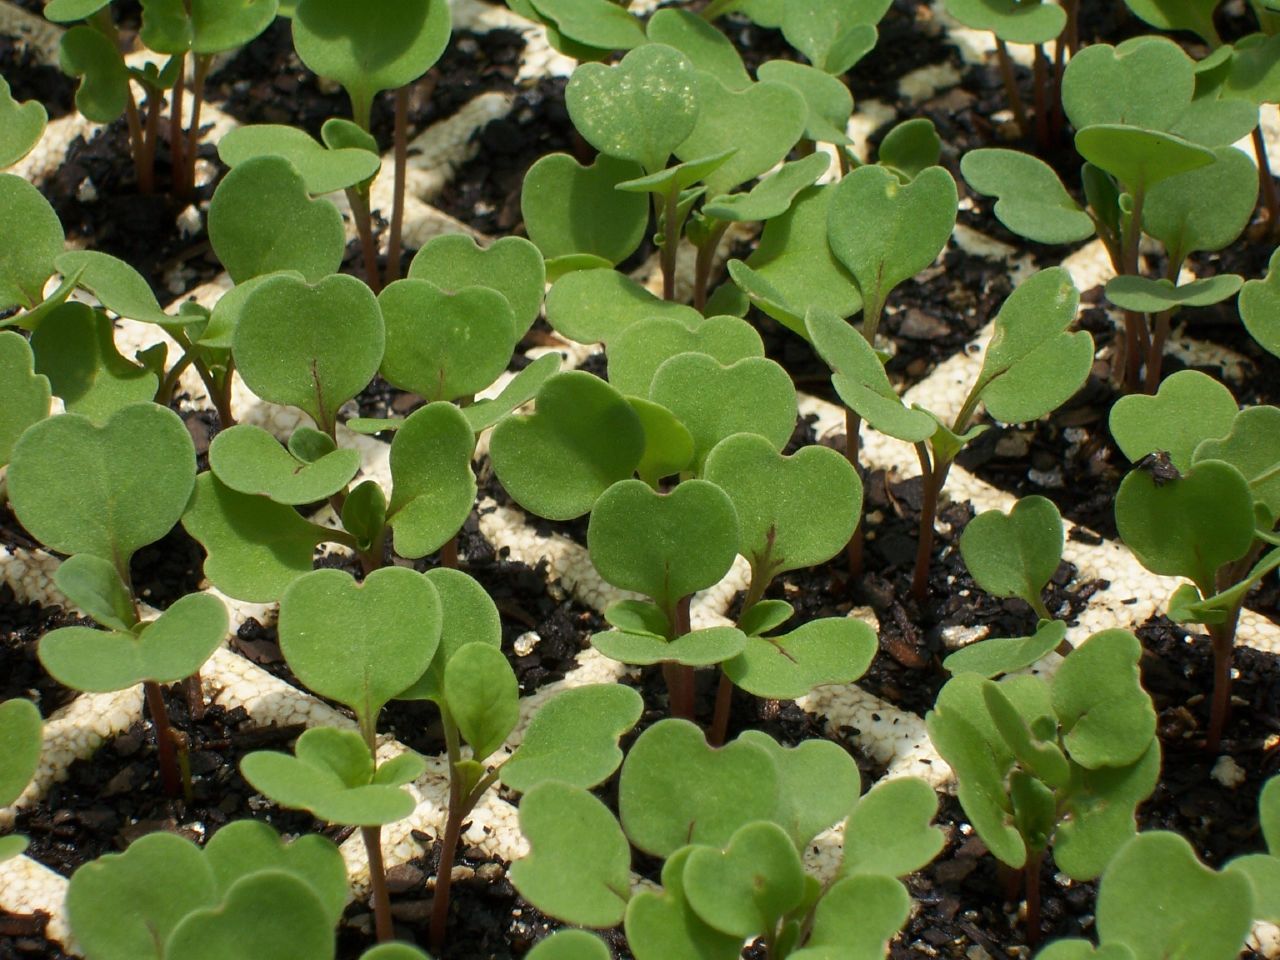 green plants sprouts from the soil with tiny rocks surrounding them